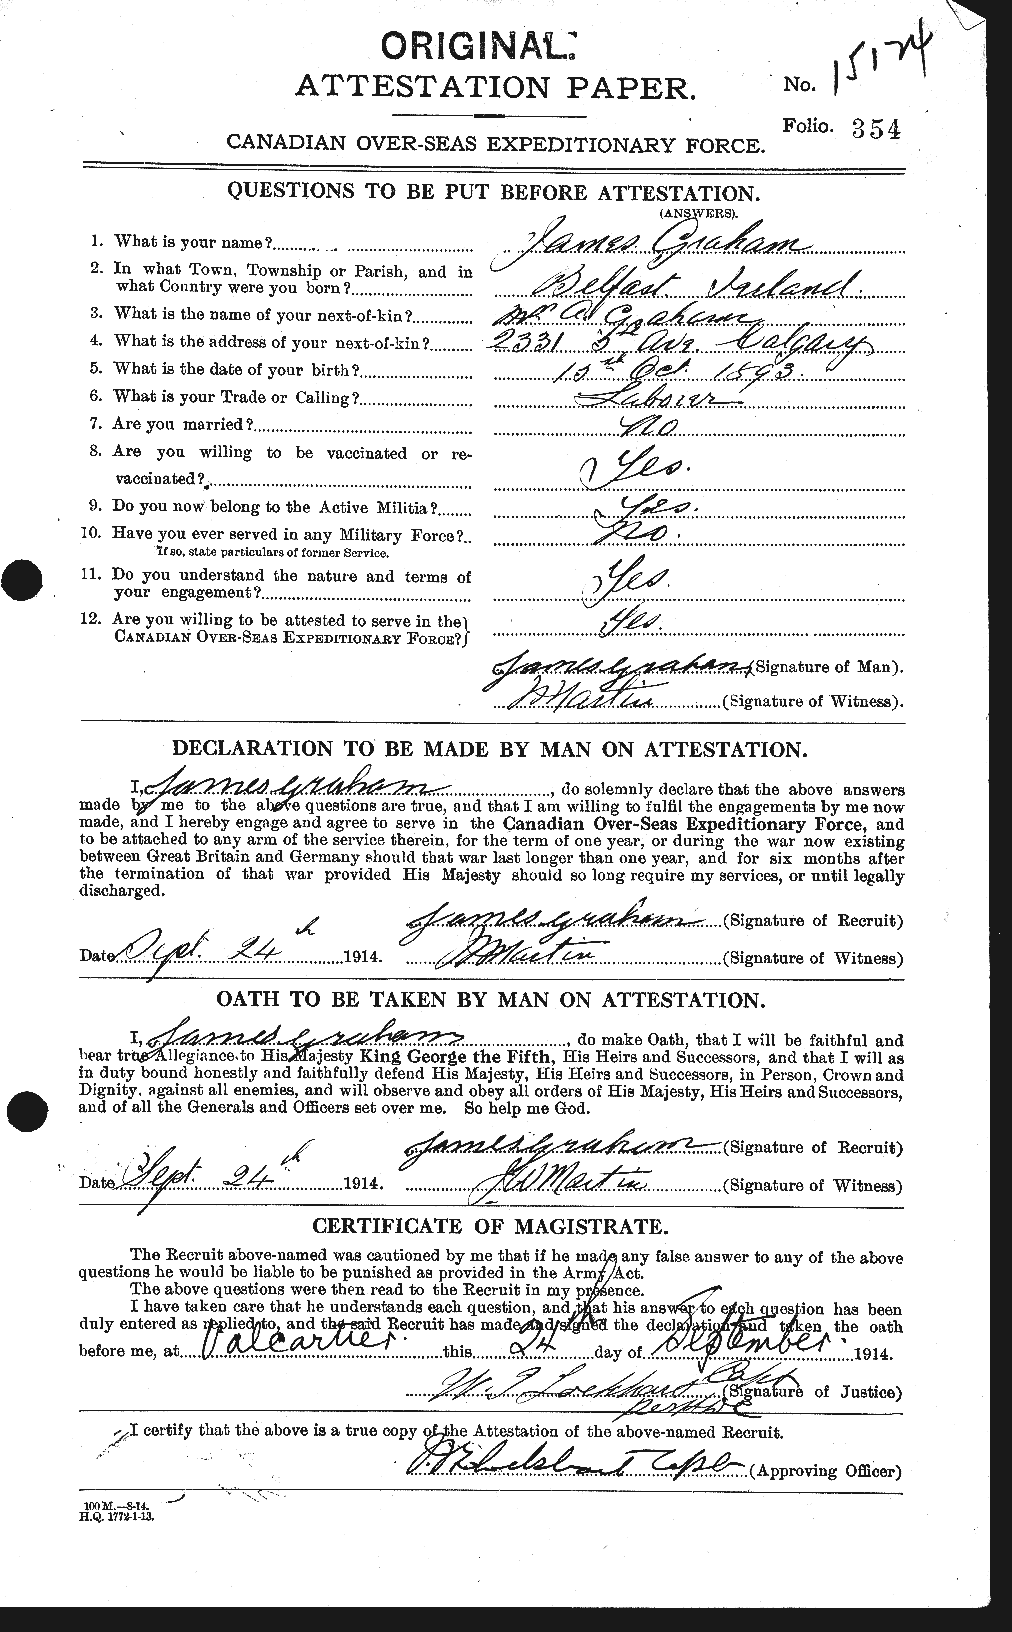 Personnel Records of the First World War - CEF 357789a